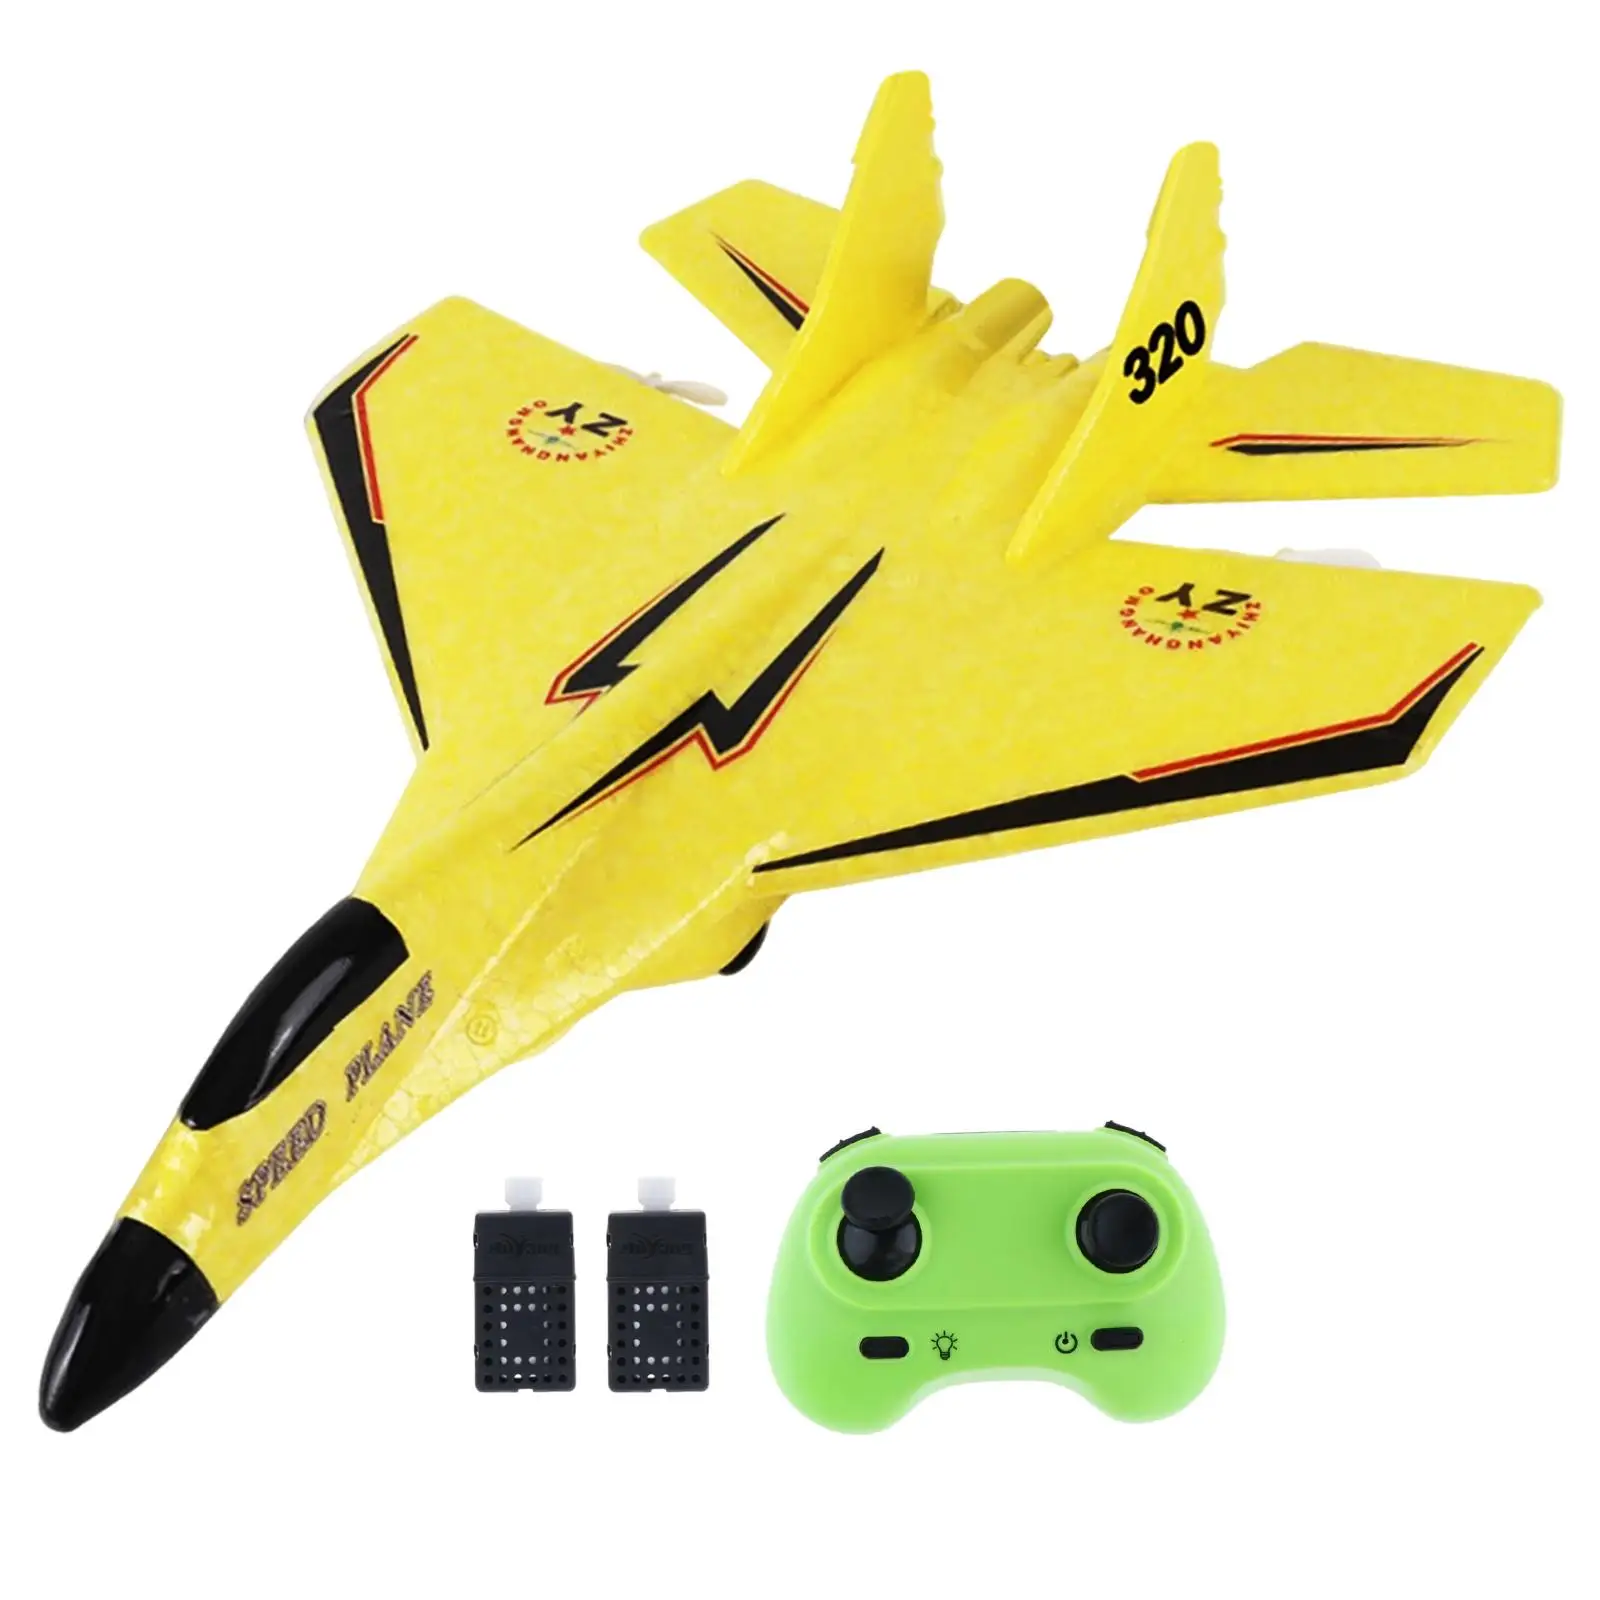 

2 CH RC Plane to Fly Outdoor Flighting Toys Ready to Fly Glider Foam RC Airplane for Beginner Adults Kids Boys Girls